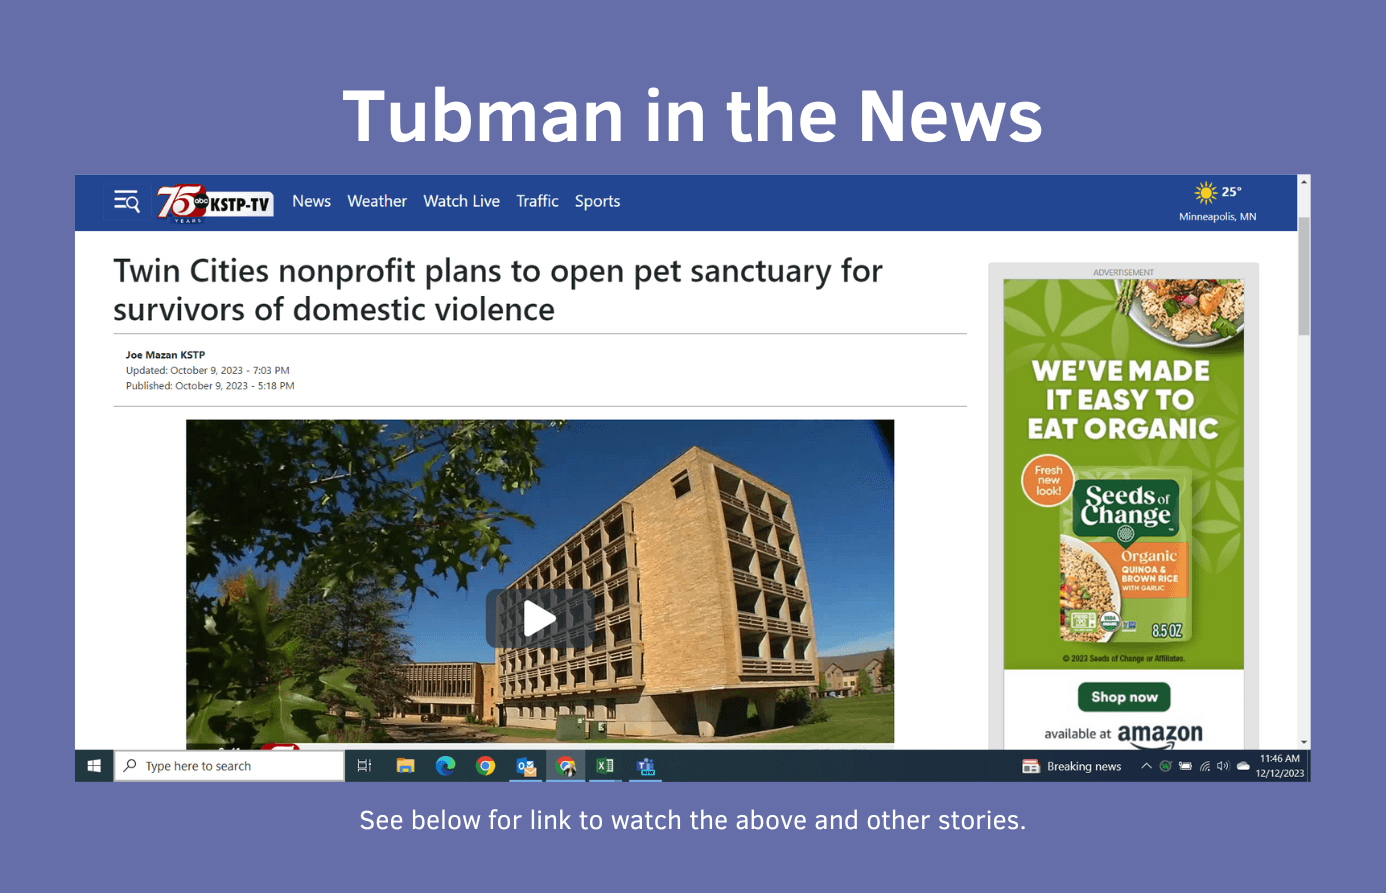 Tubman in the News